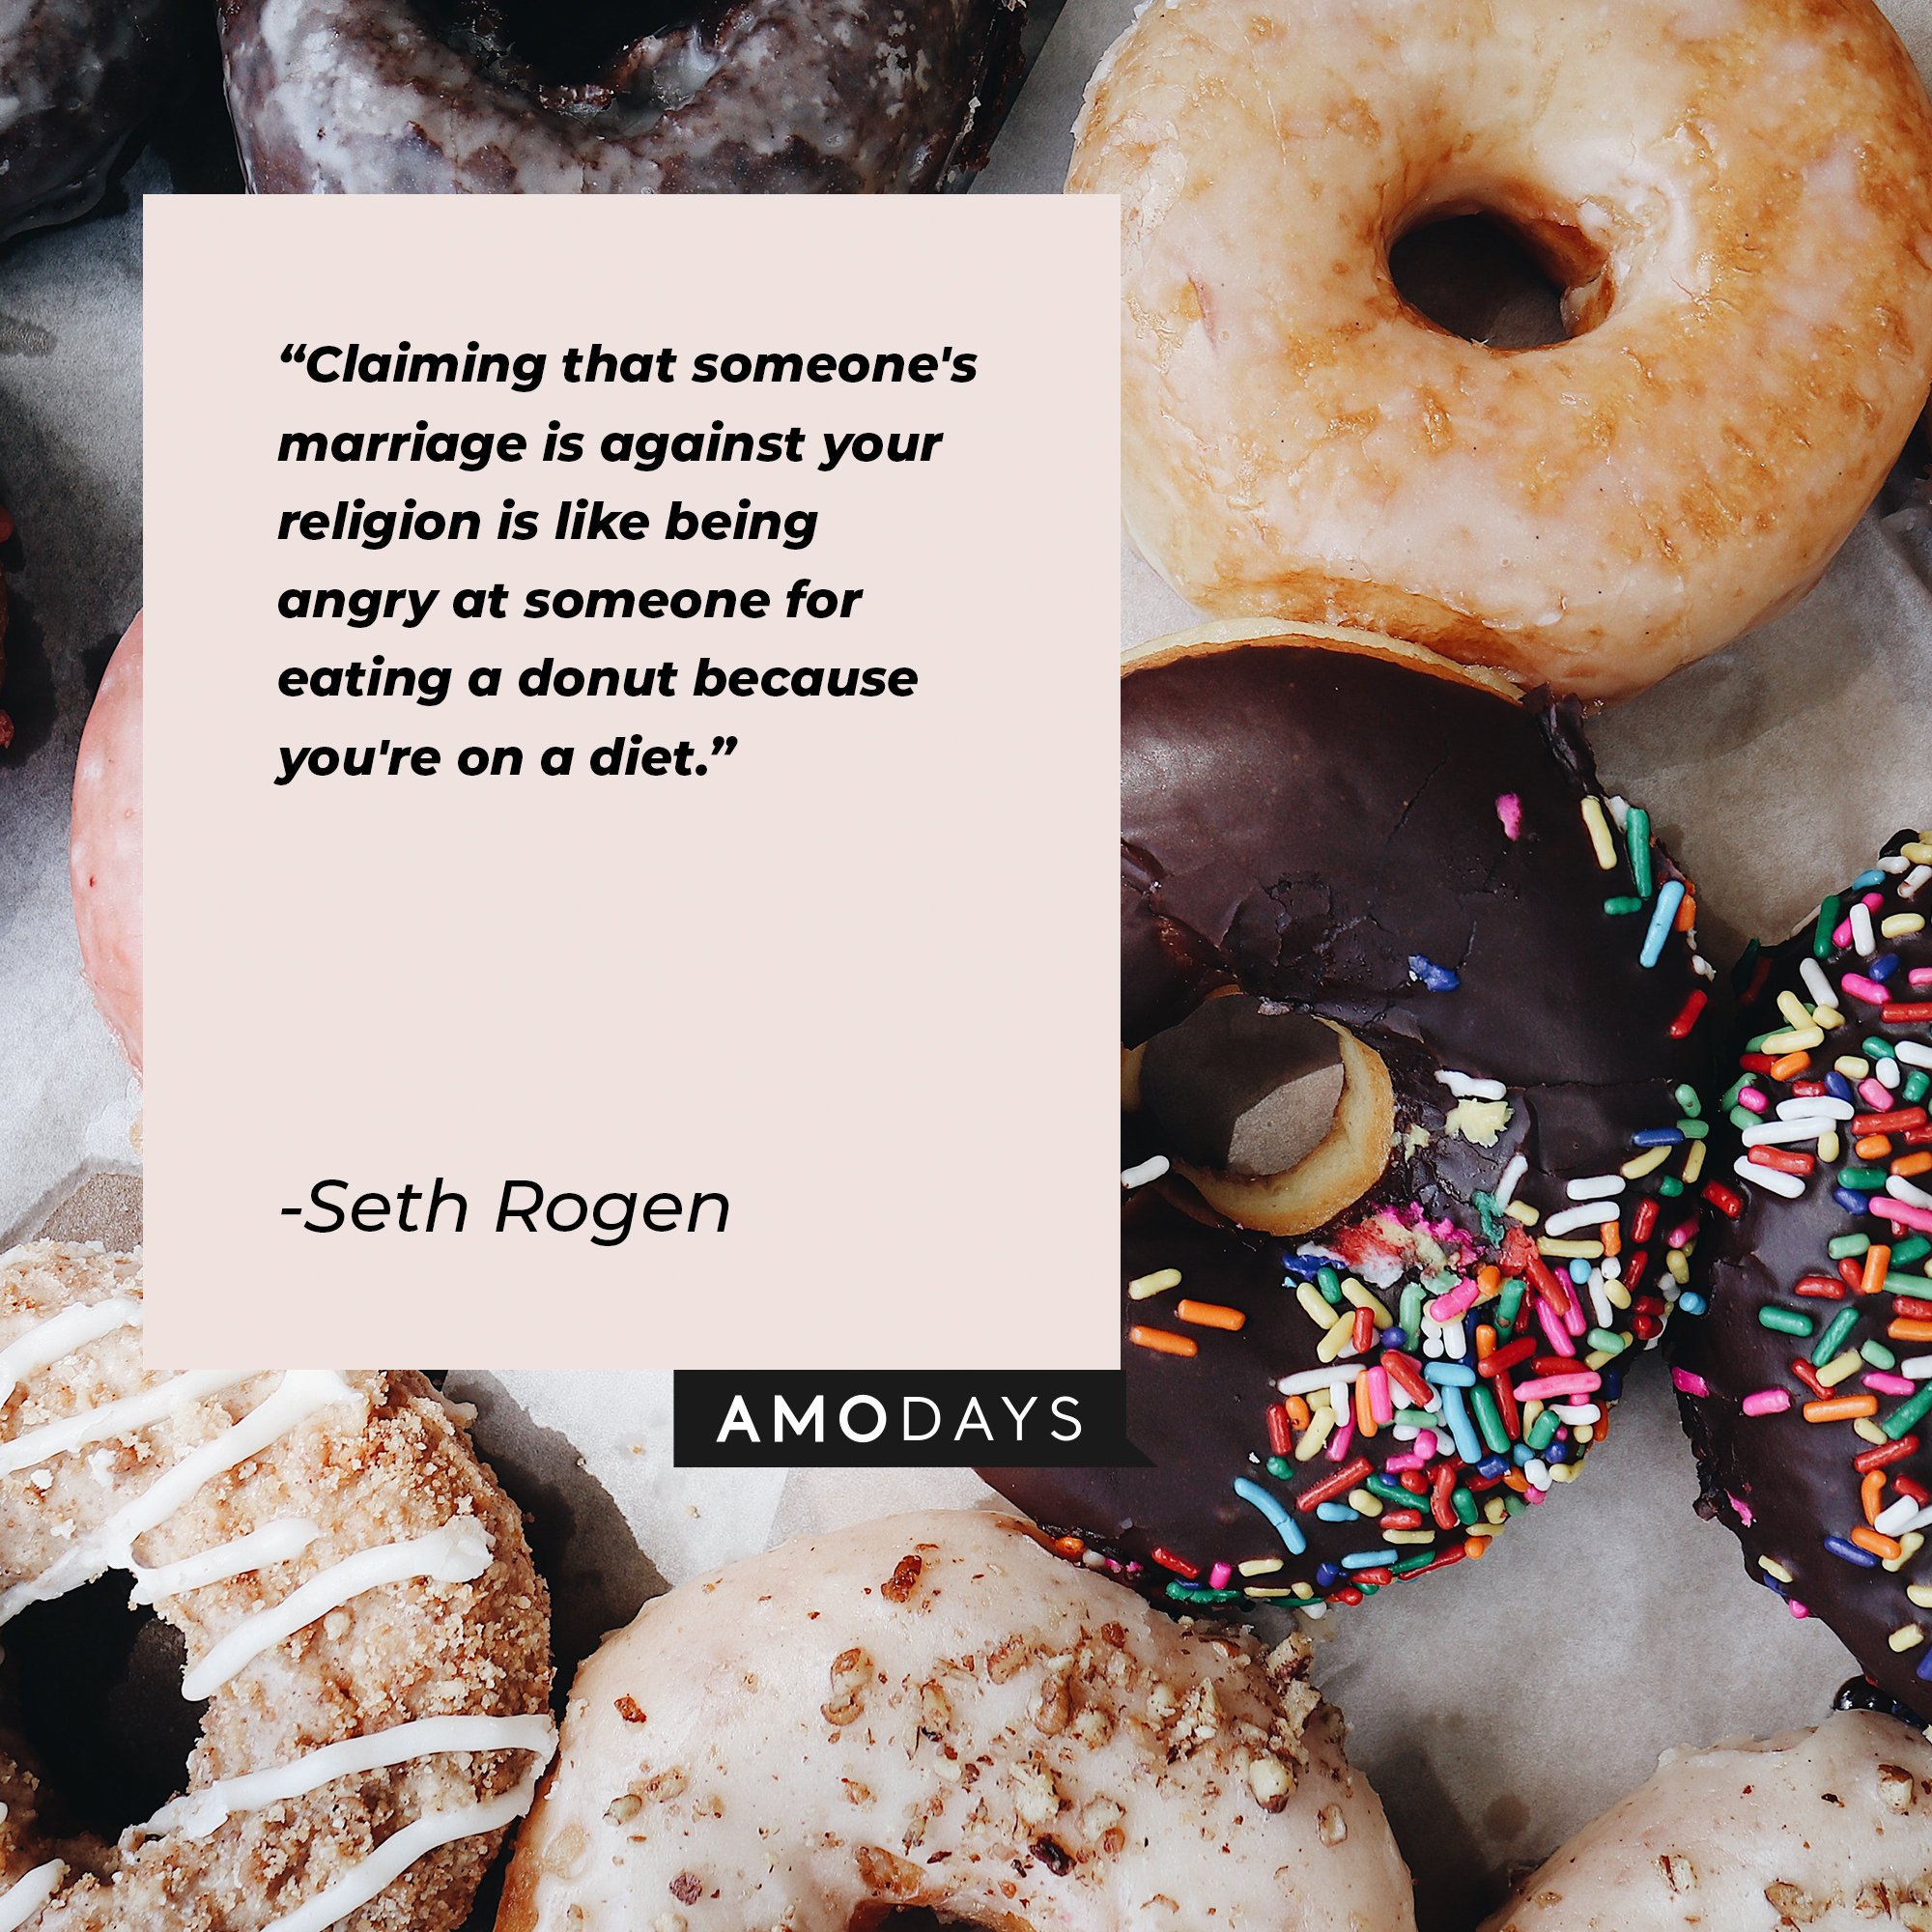 Seth Rogen's quote: "Claiming that someone's marriage is against your religion is like being angry at someone for eating a donut because you're on a diet." | Image: AmoDays